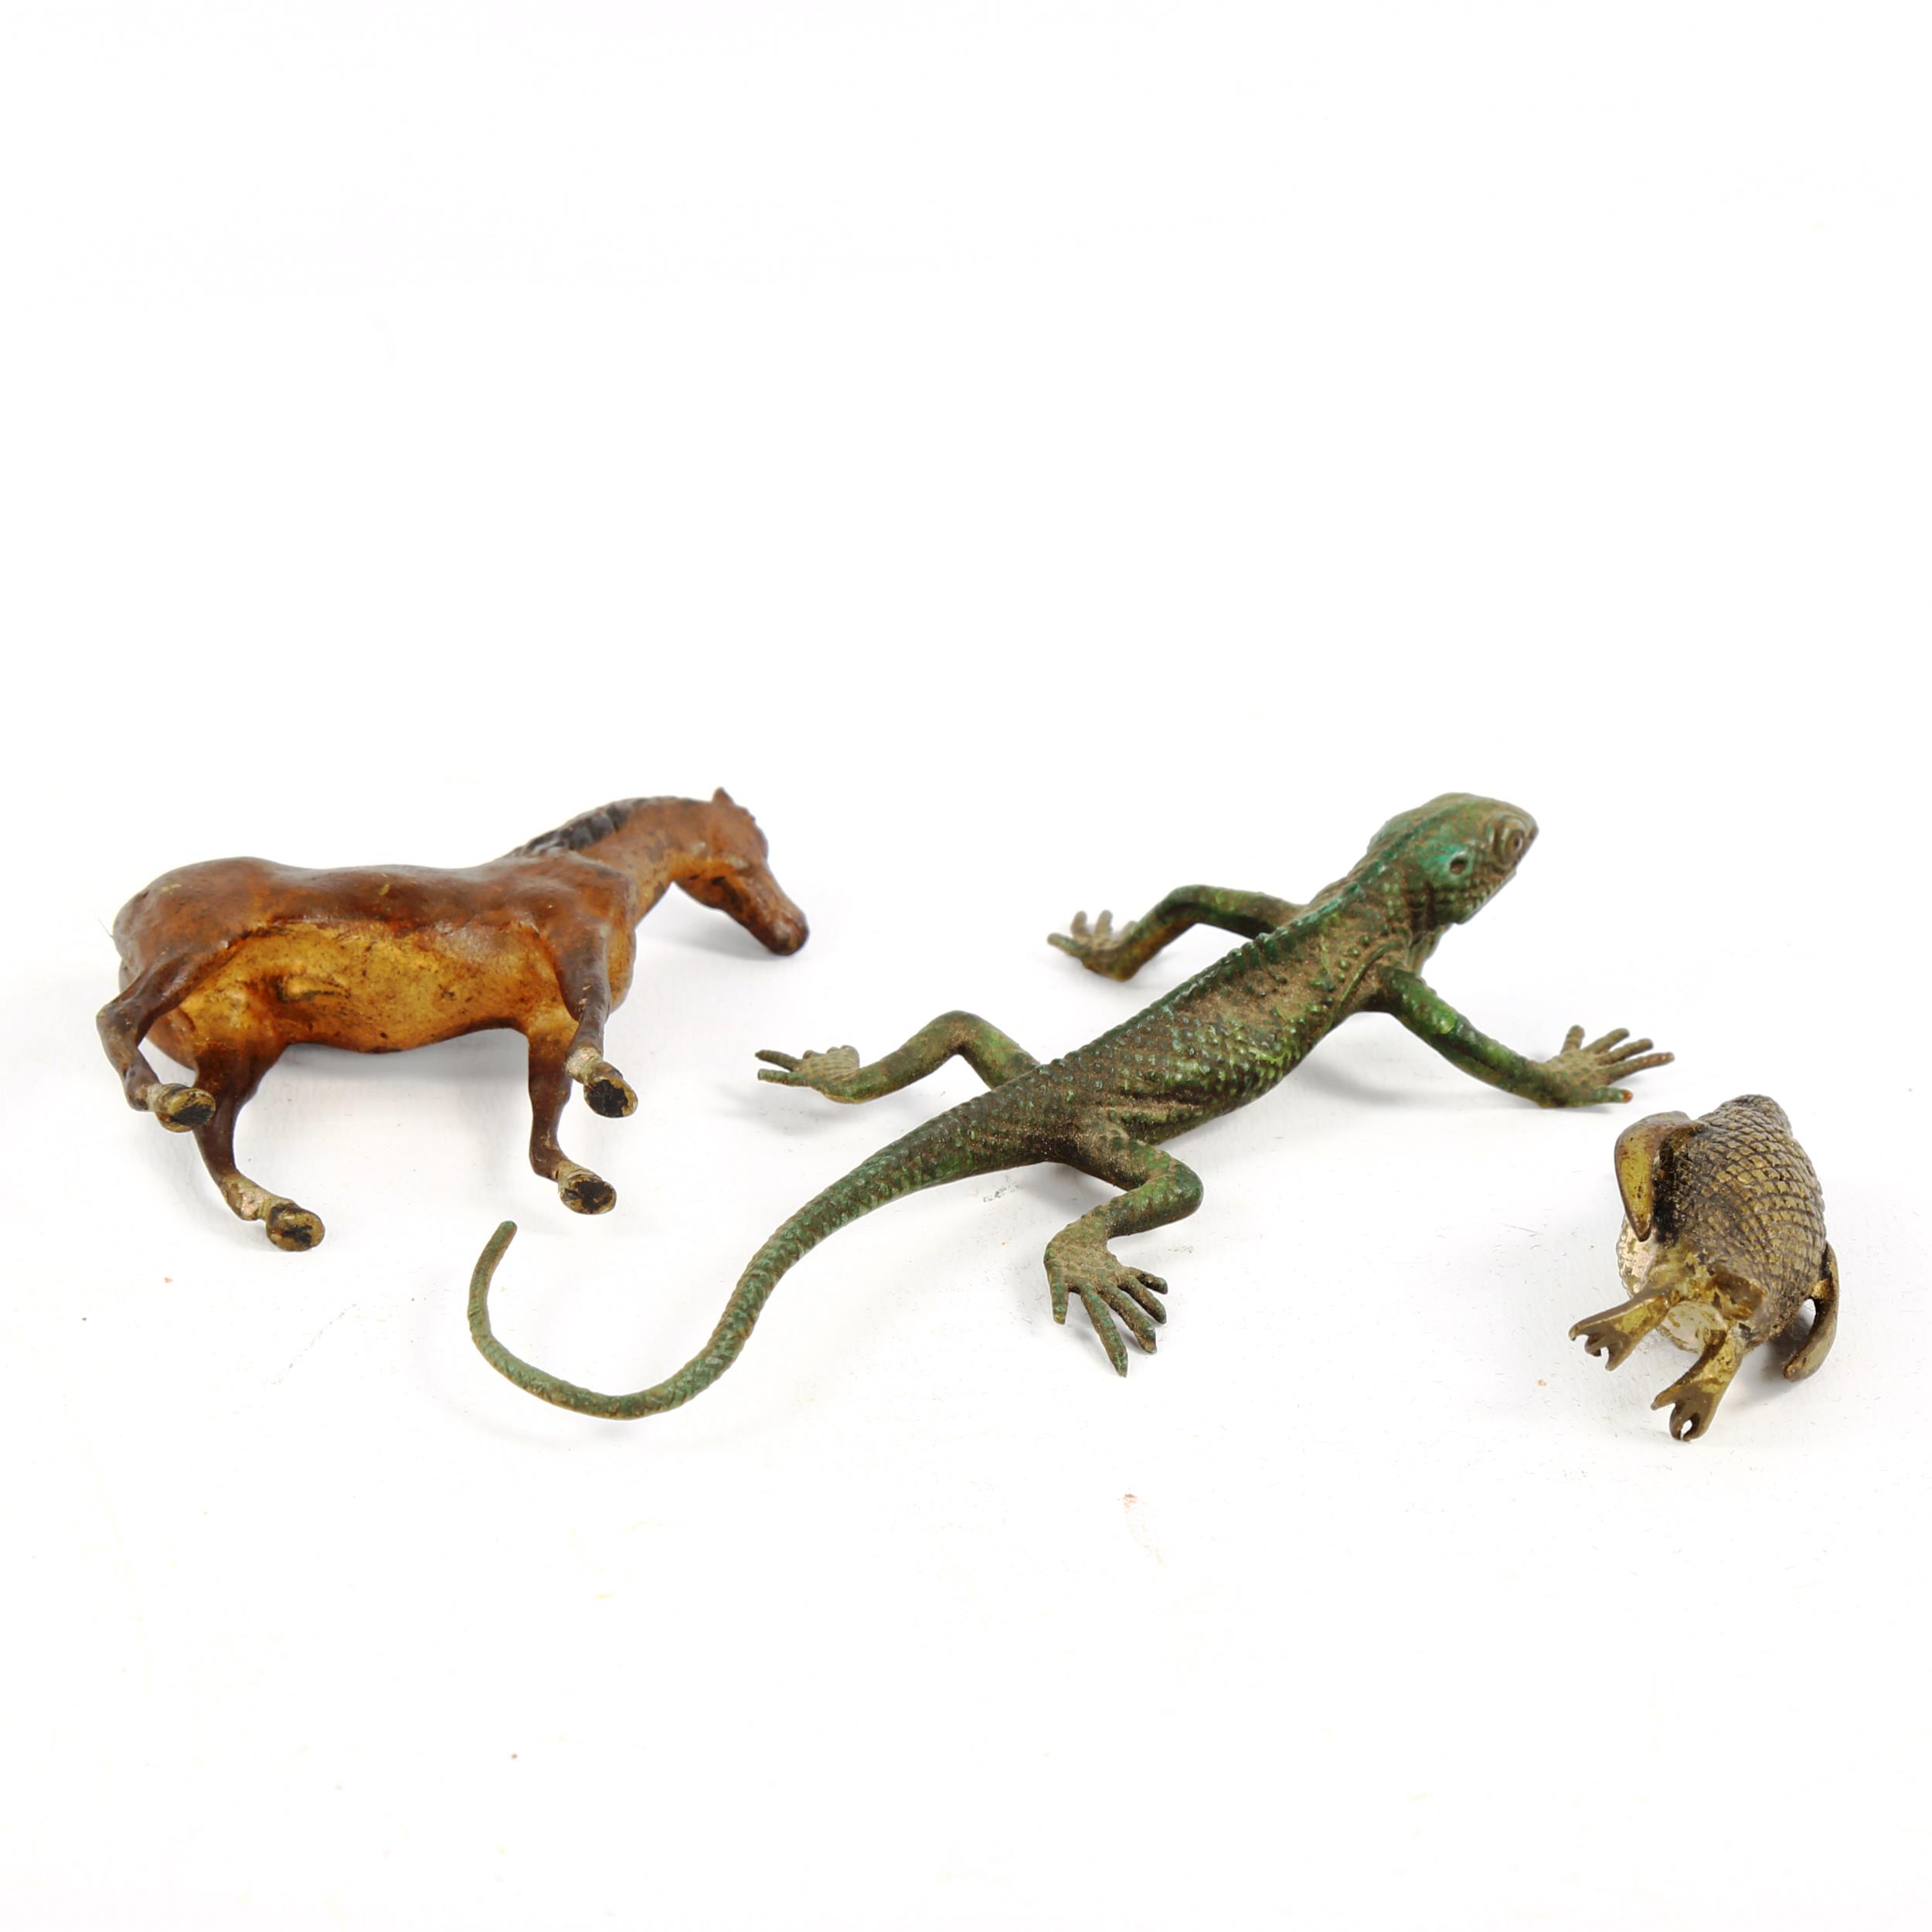 3 Austrian cold painted bronze animals, penguin, height 4cm, horse, height 6cm, and a lizard (3) - Image 3 of 3